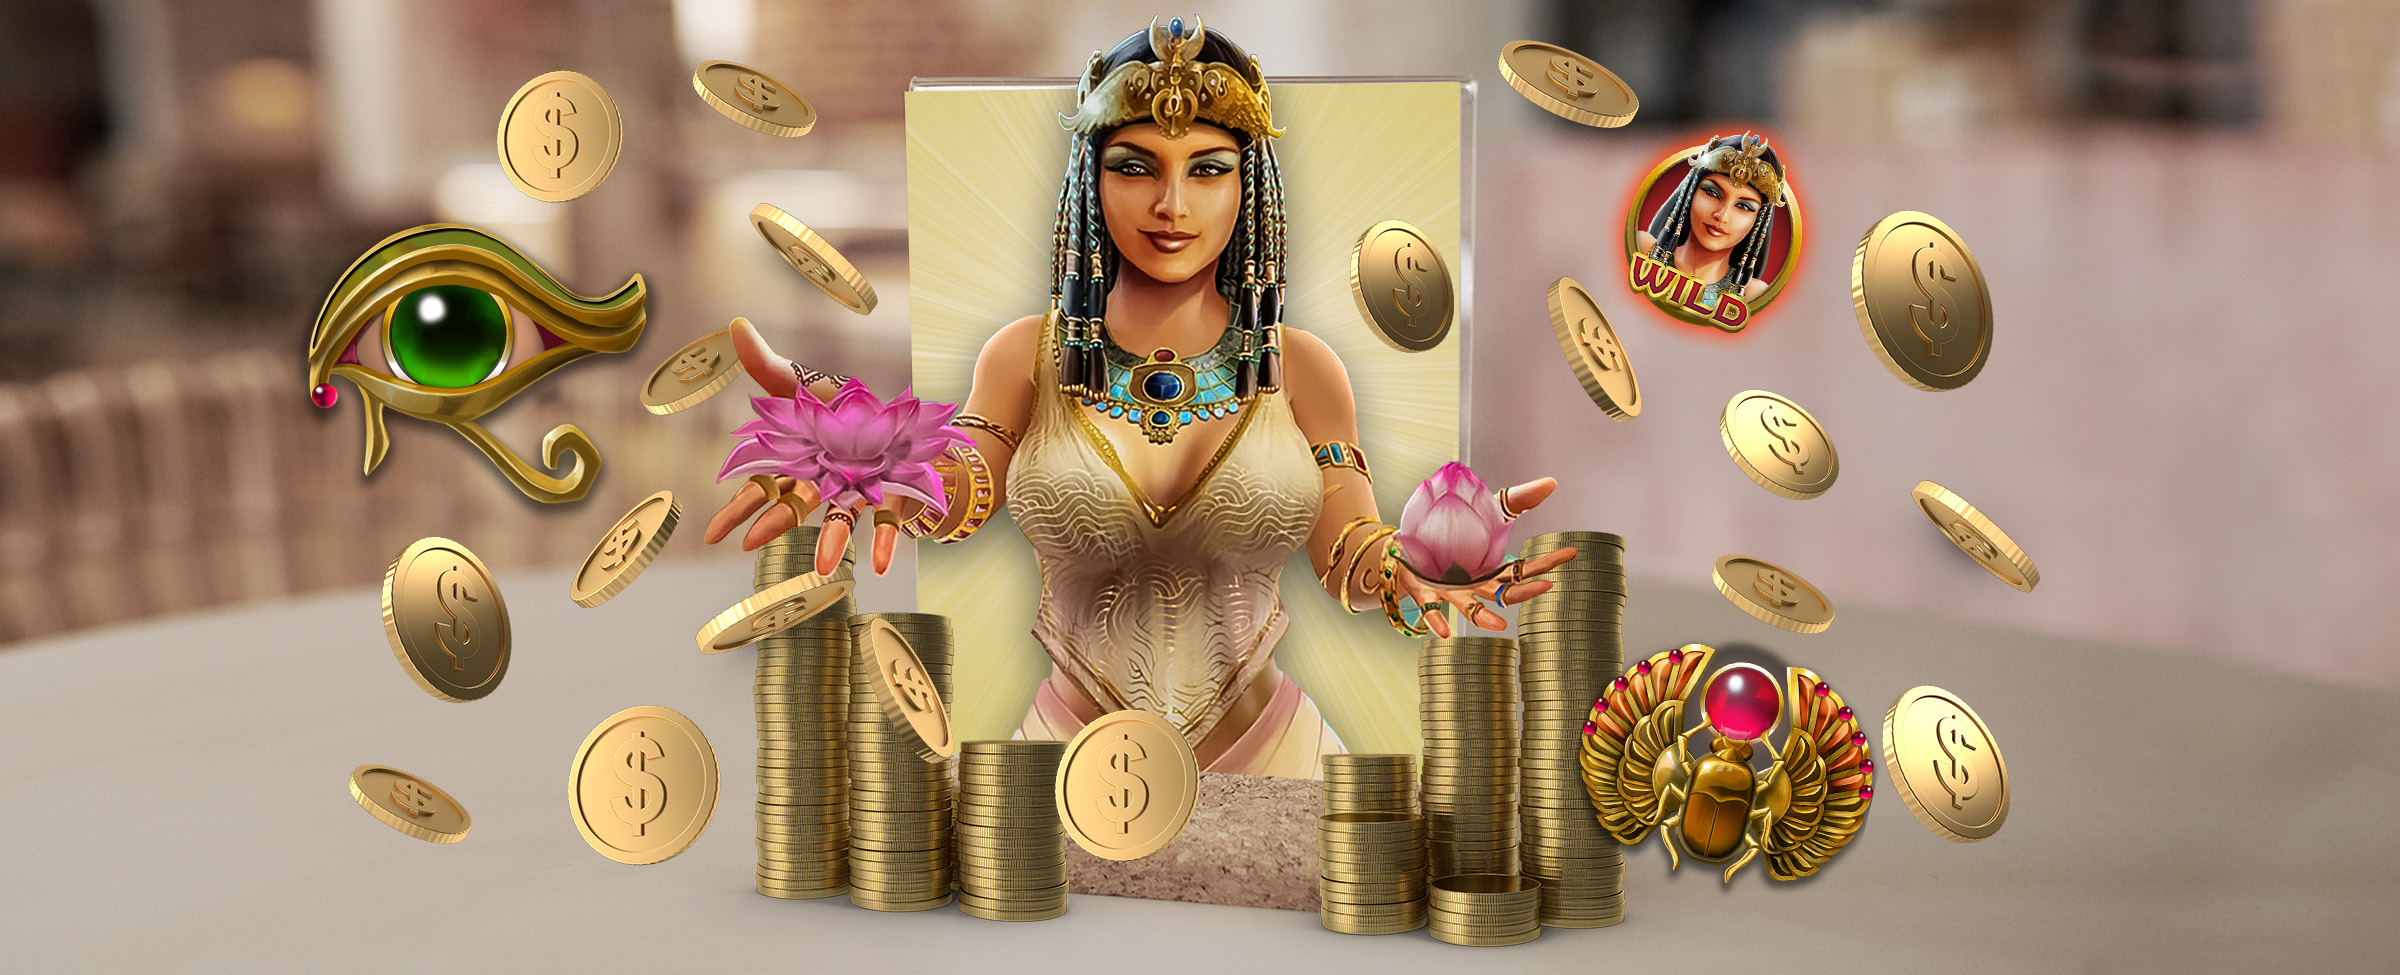 A cartoon character of Cleopatra from the Cafe Casino slot game A Night With Cleo, appears center screen, with gold coins and game symbols floating around her, amidst stacks of gold coins sitting on a diner table.